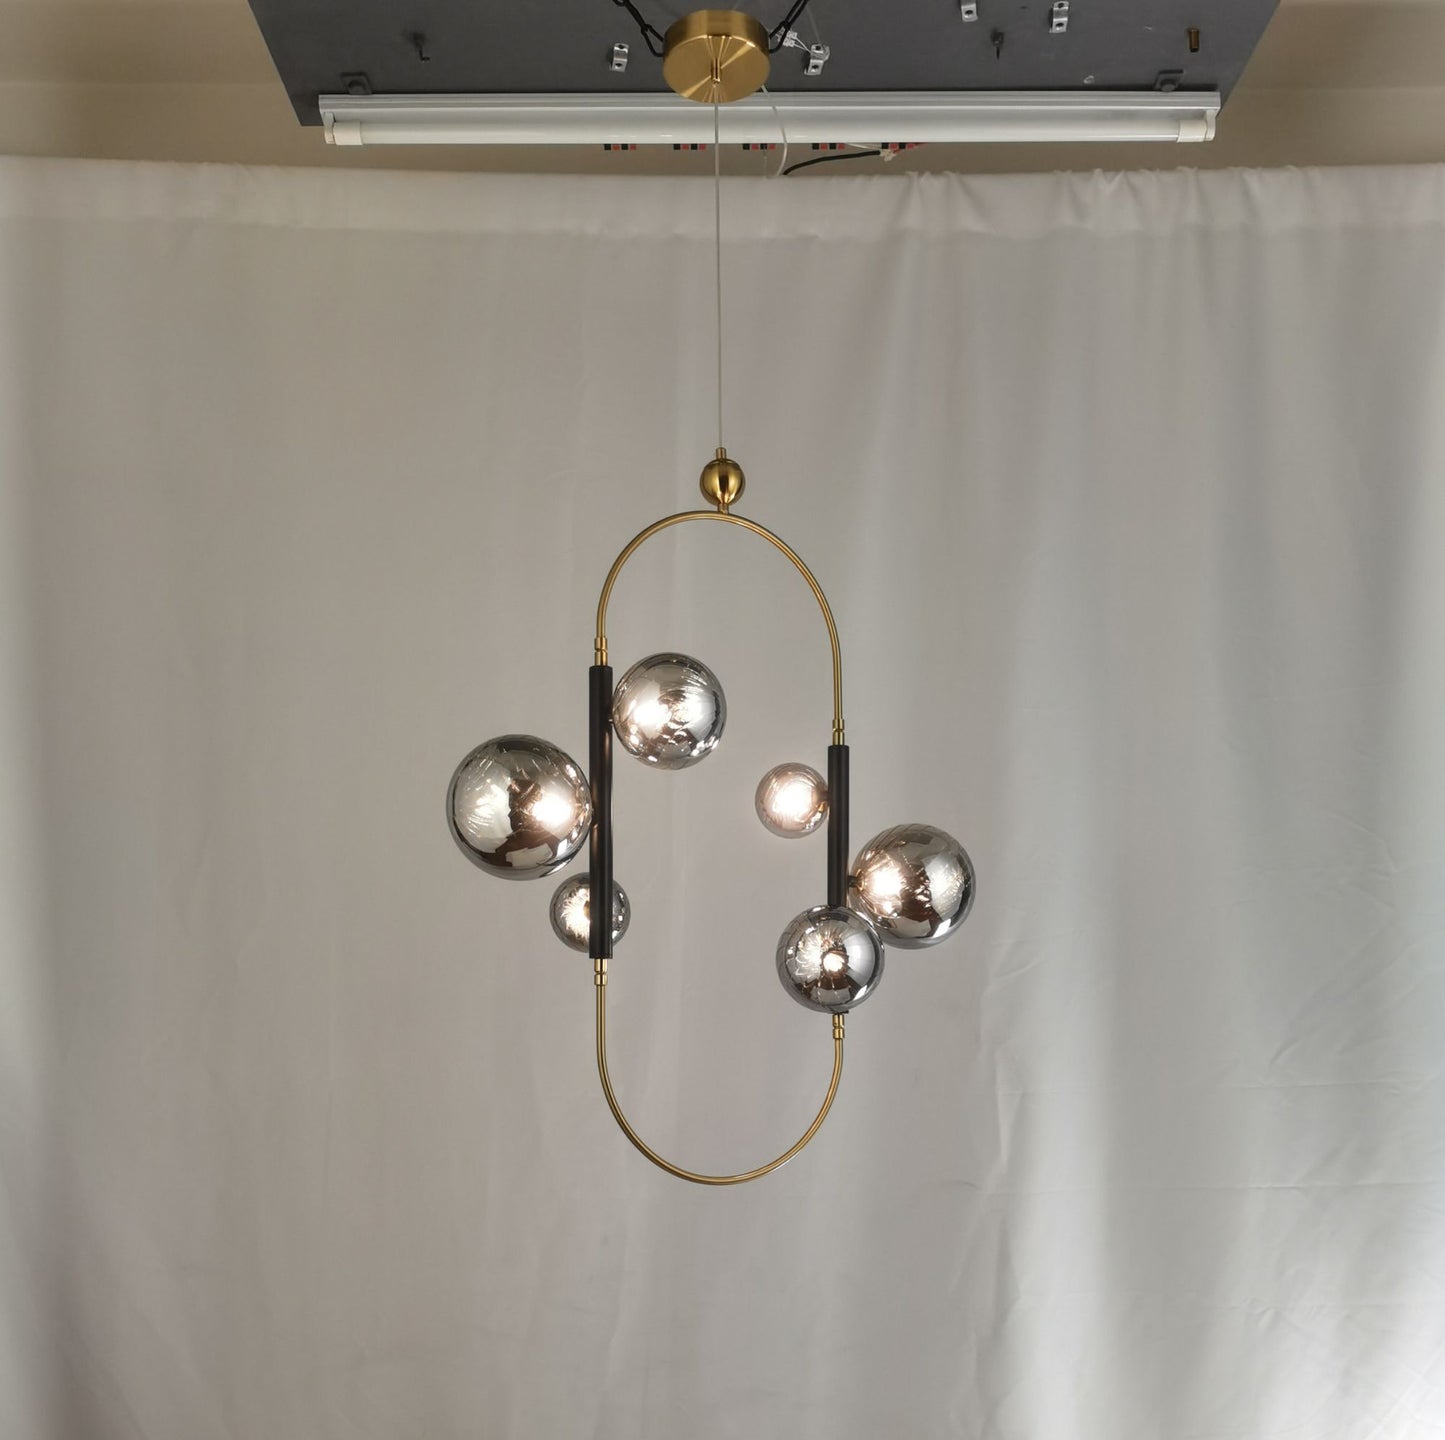 Load image into Gallery viewer, Modern Hanging Gold Glass Amber and Ash Cord Light by Gloss (A1919)
